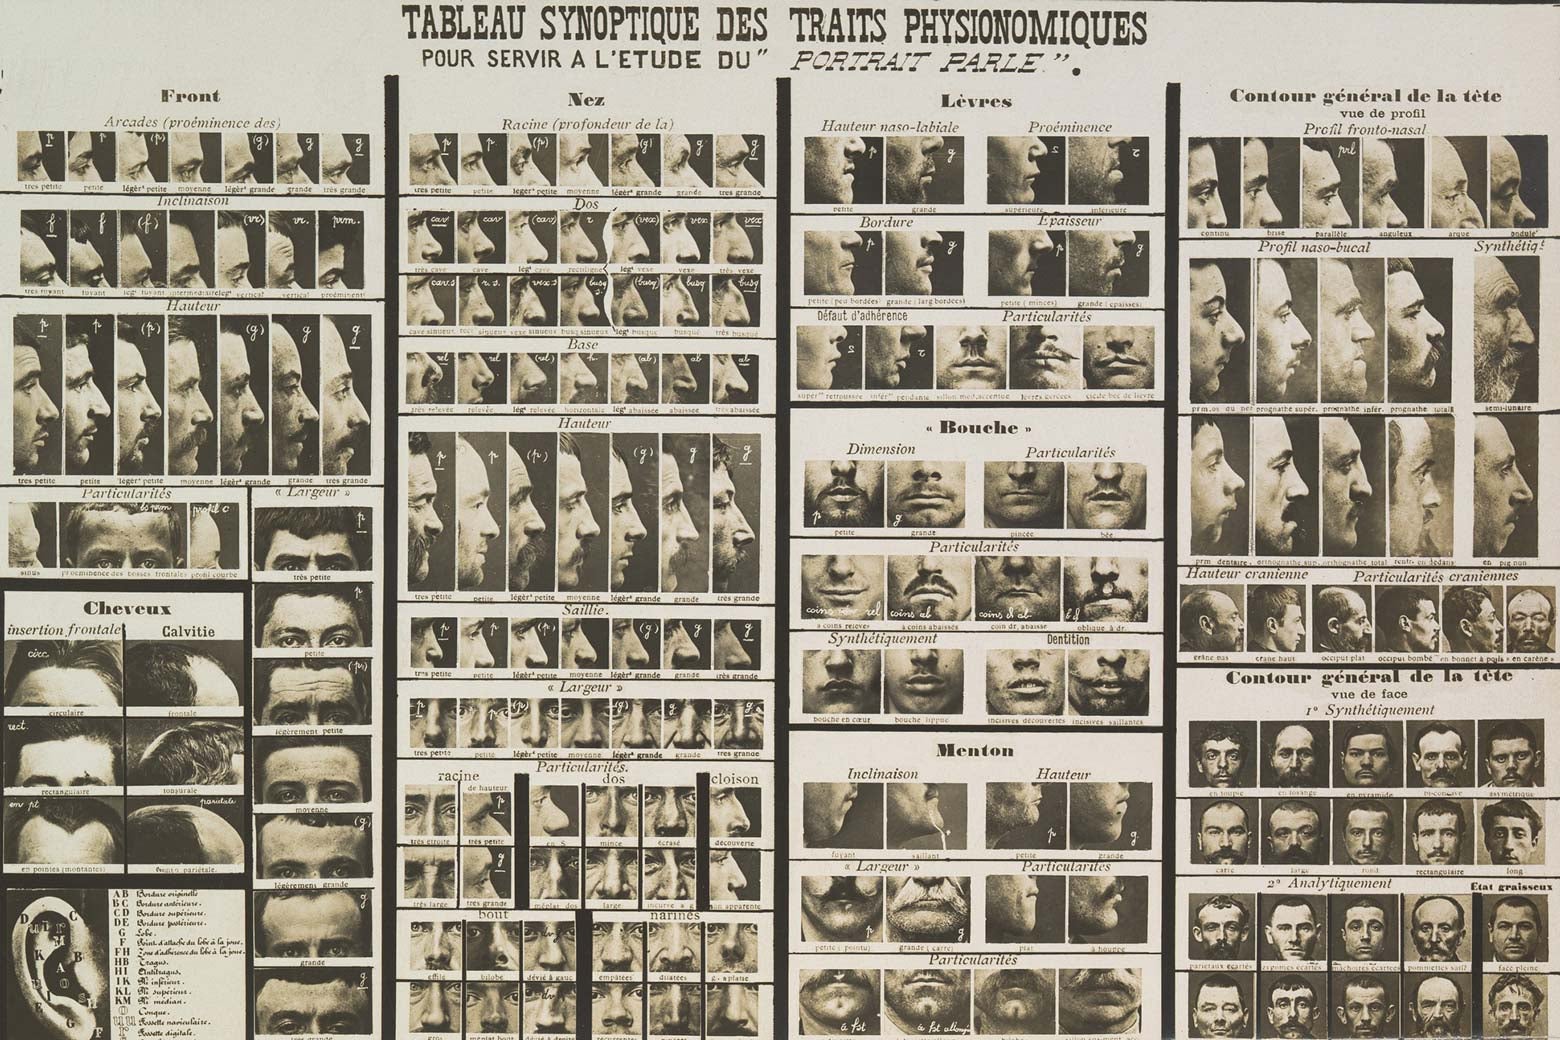 One of Bertillon’s tables of physiognomic features for study.